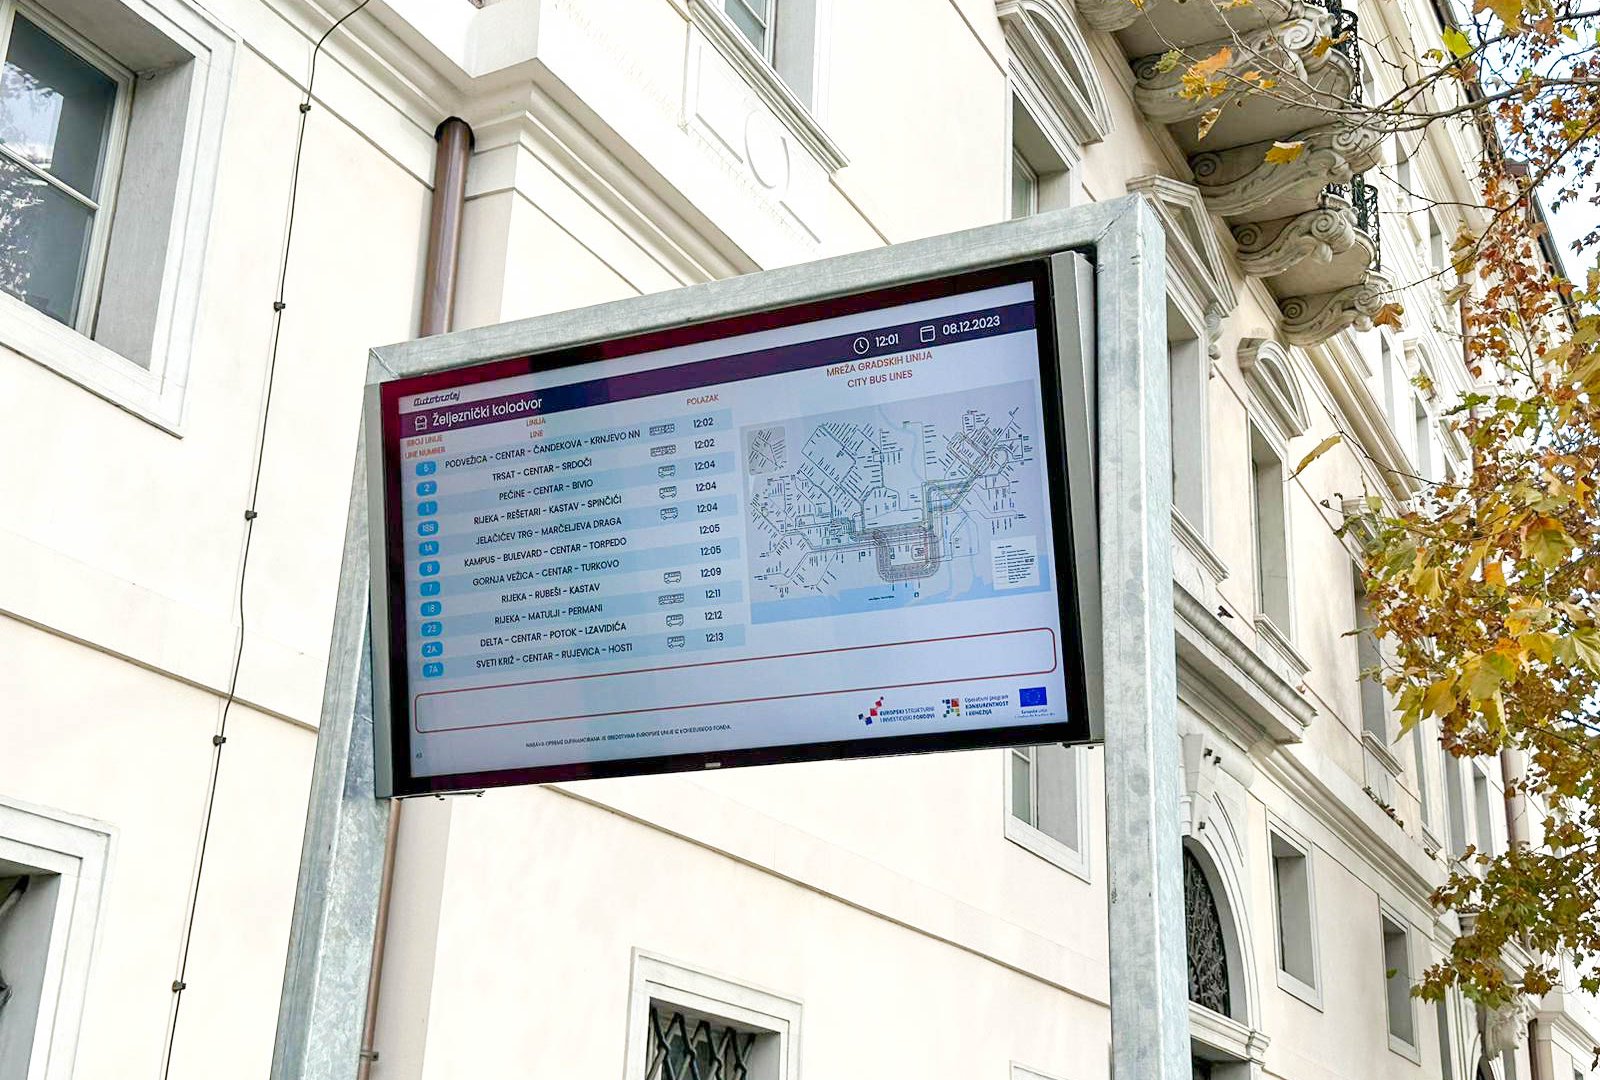 Completion of the project "Strengthening the transport system" and presentation of the passenger information system in Rijeka